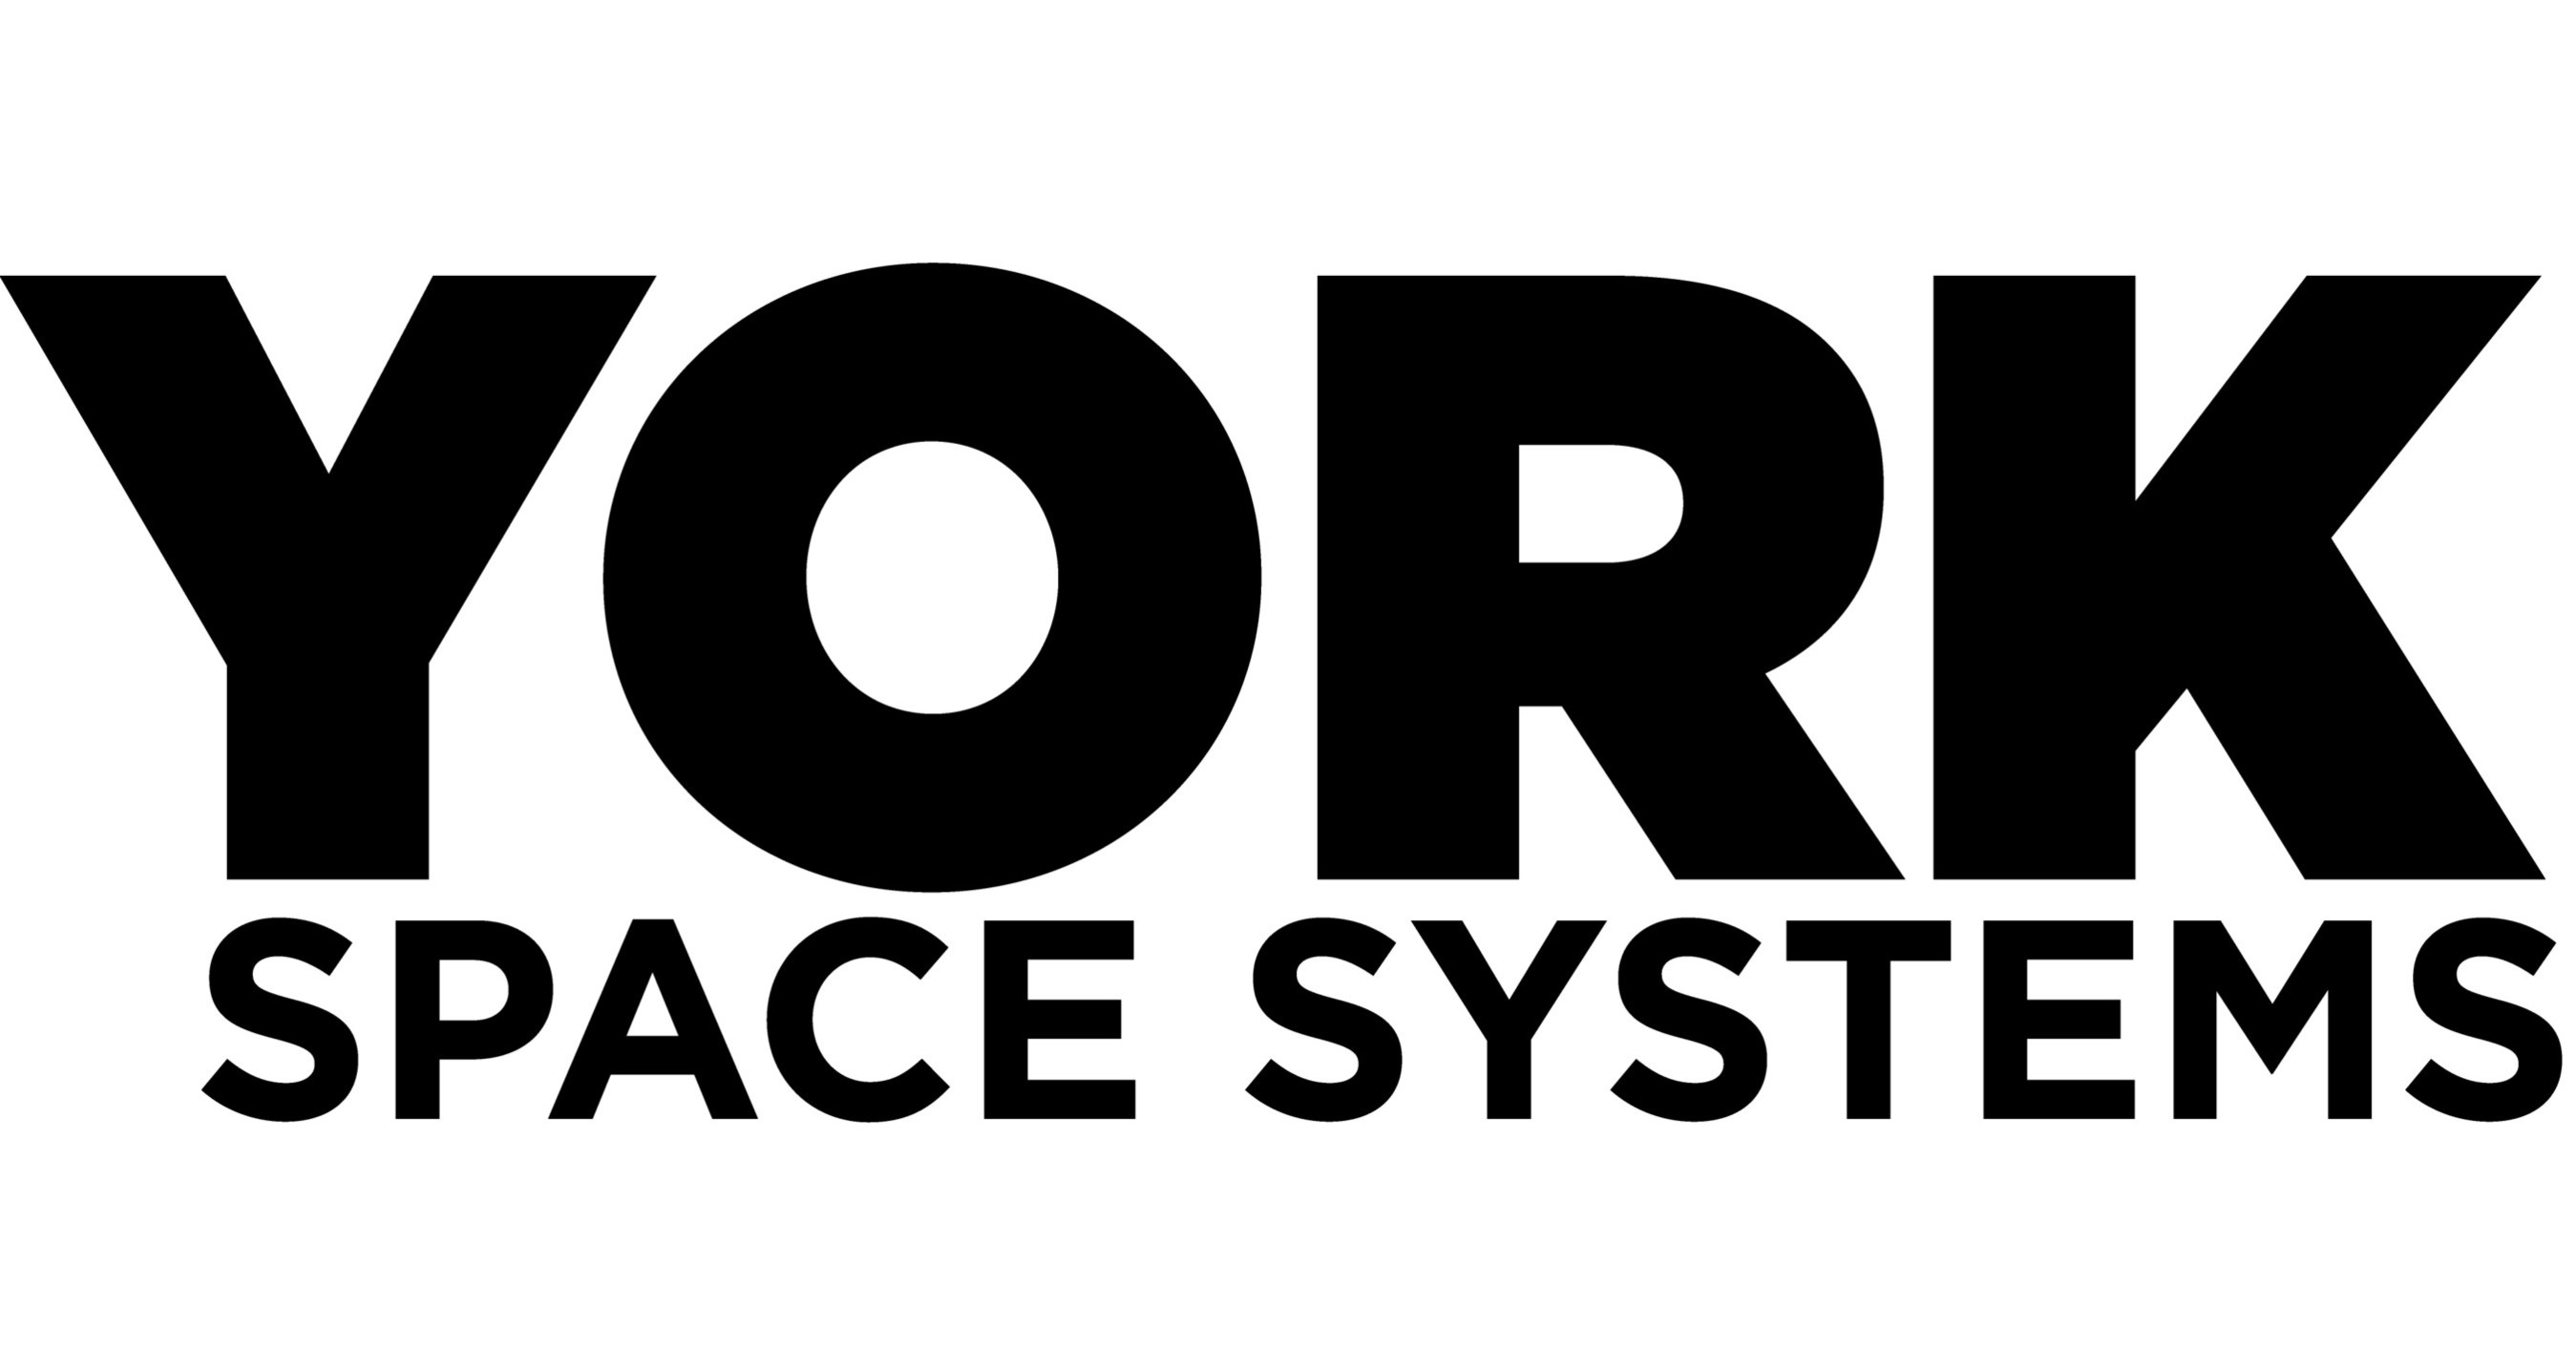 The York Space Systems company logo.